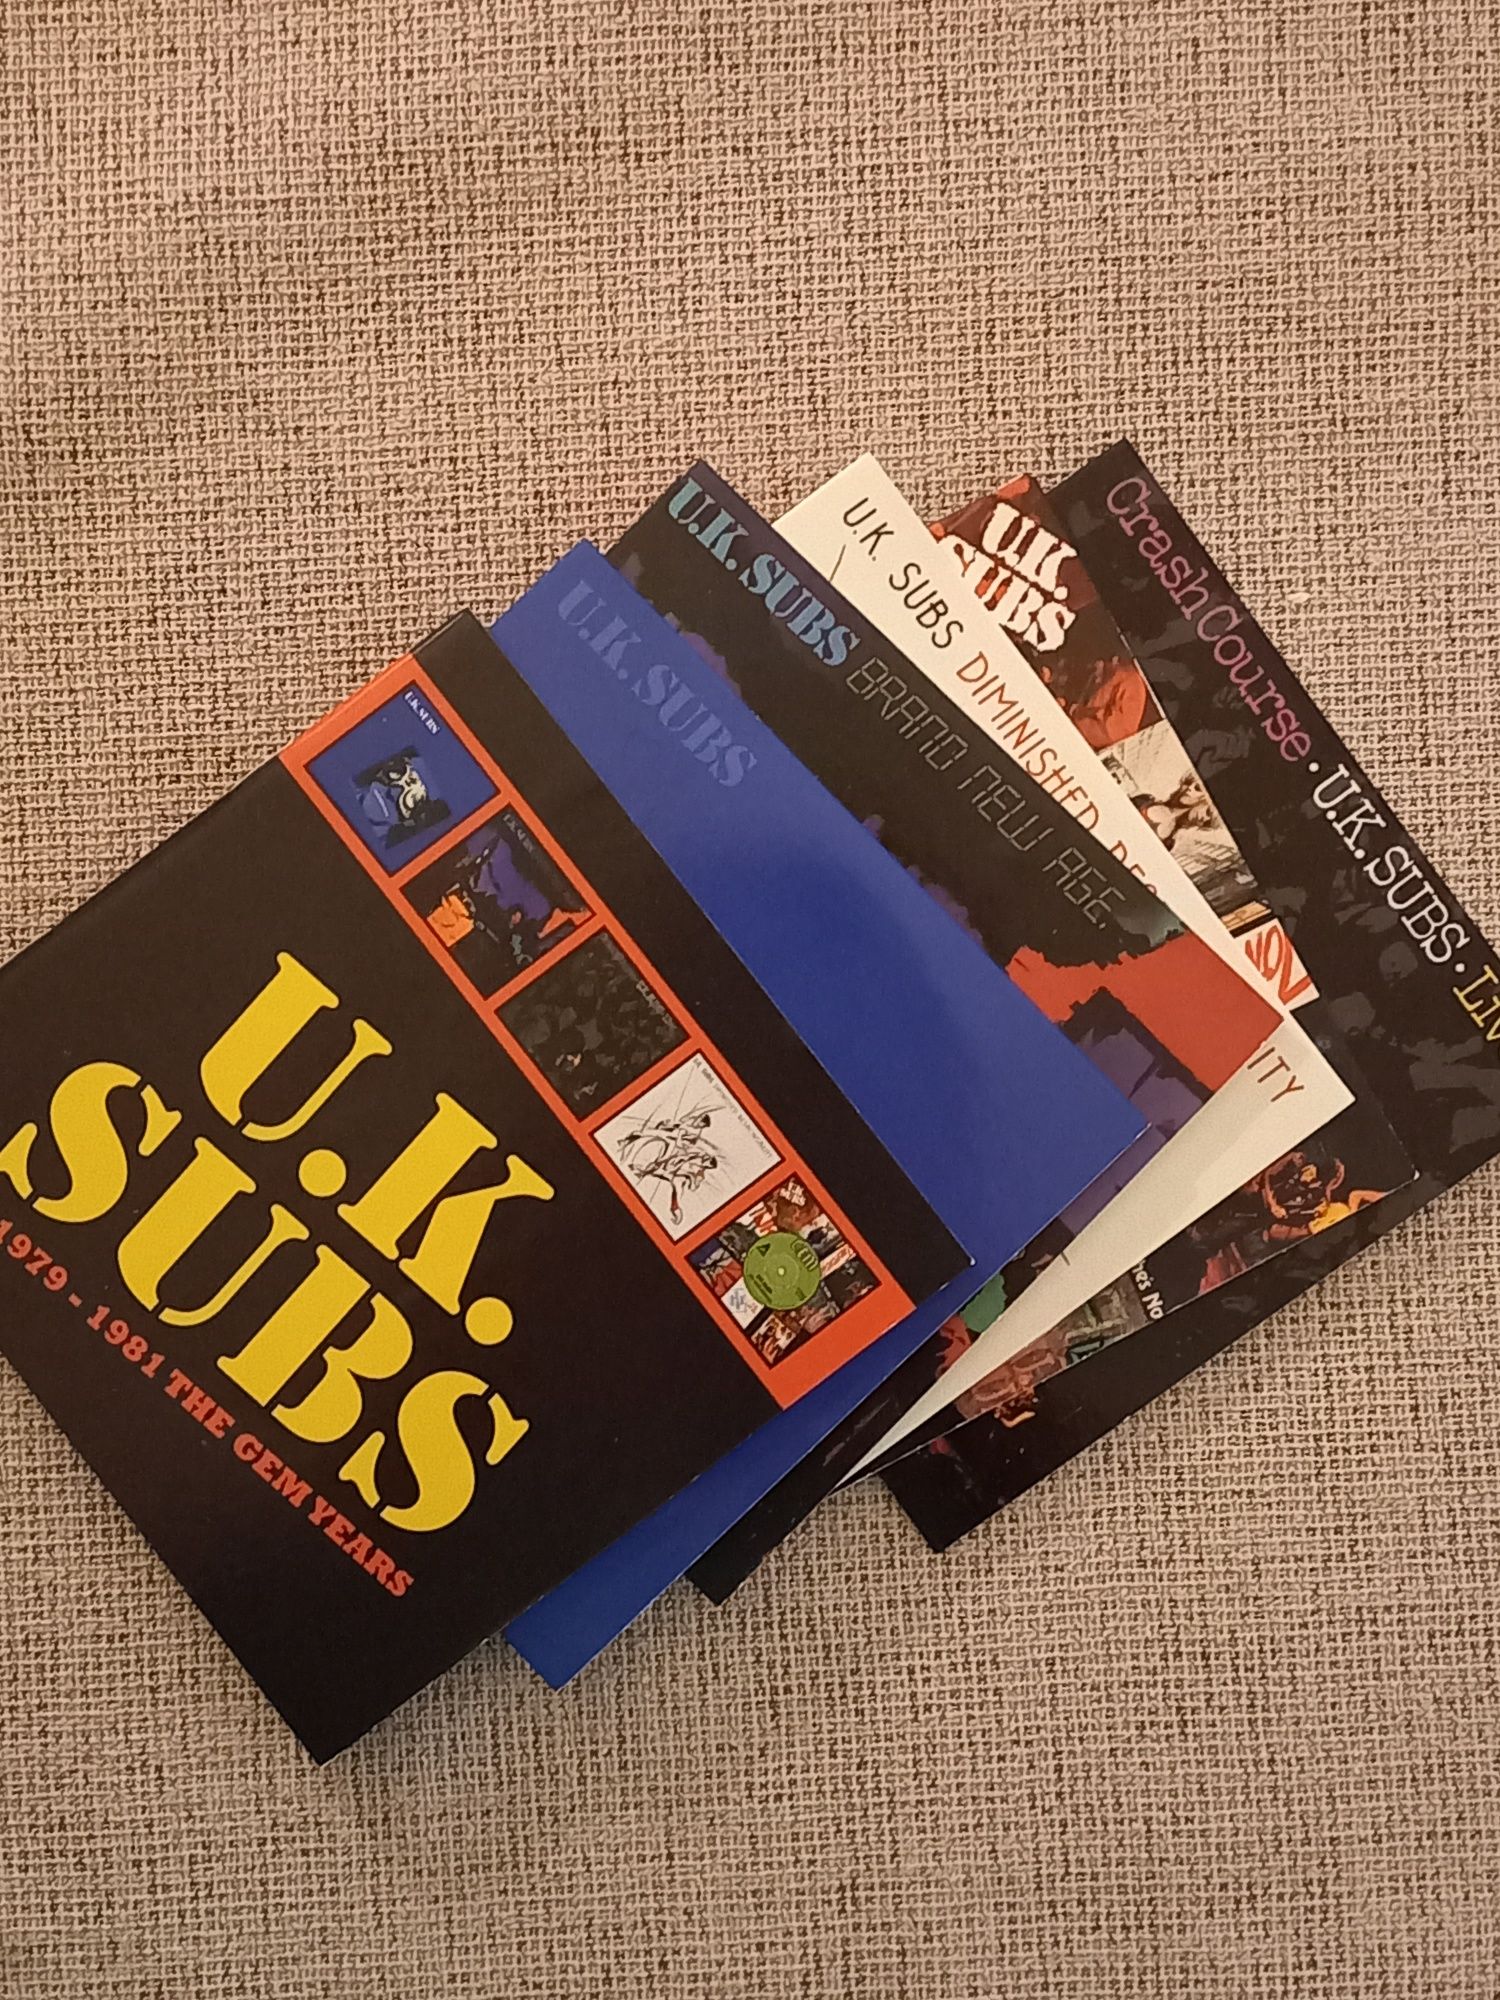 UK Subs The Gem Years CD